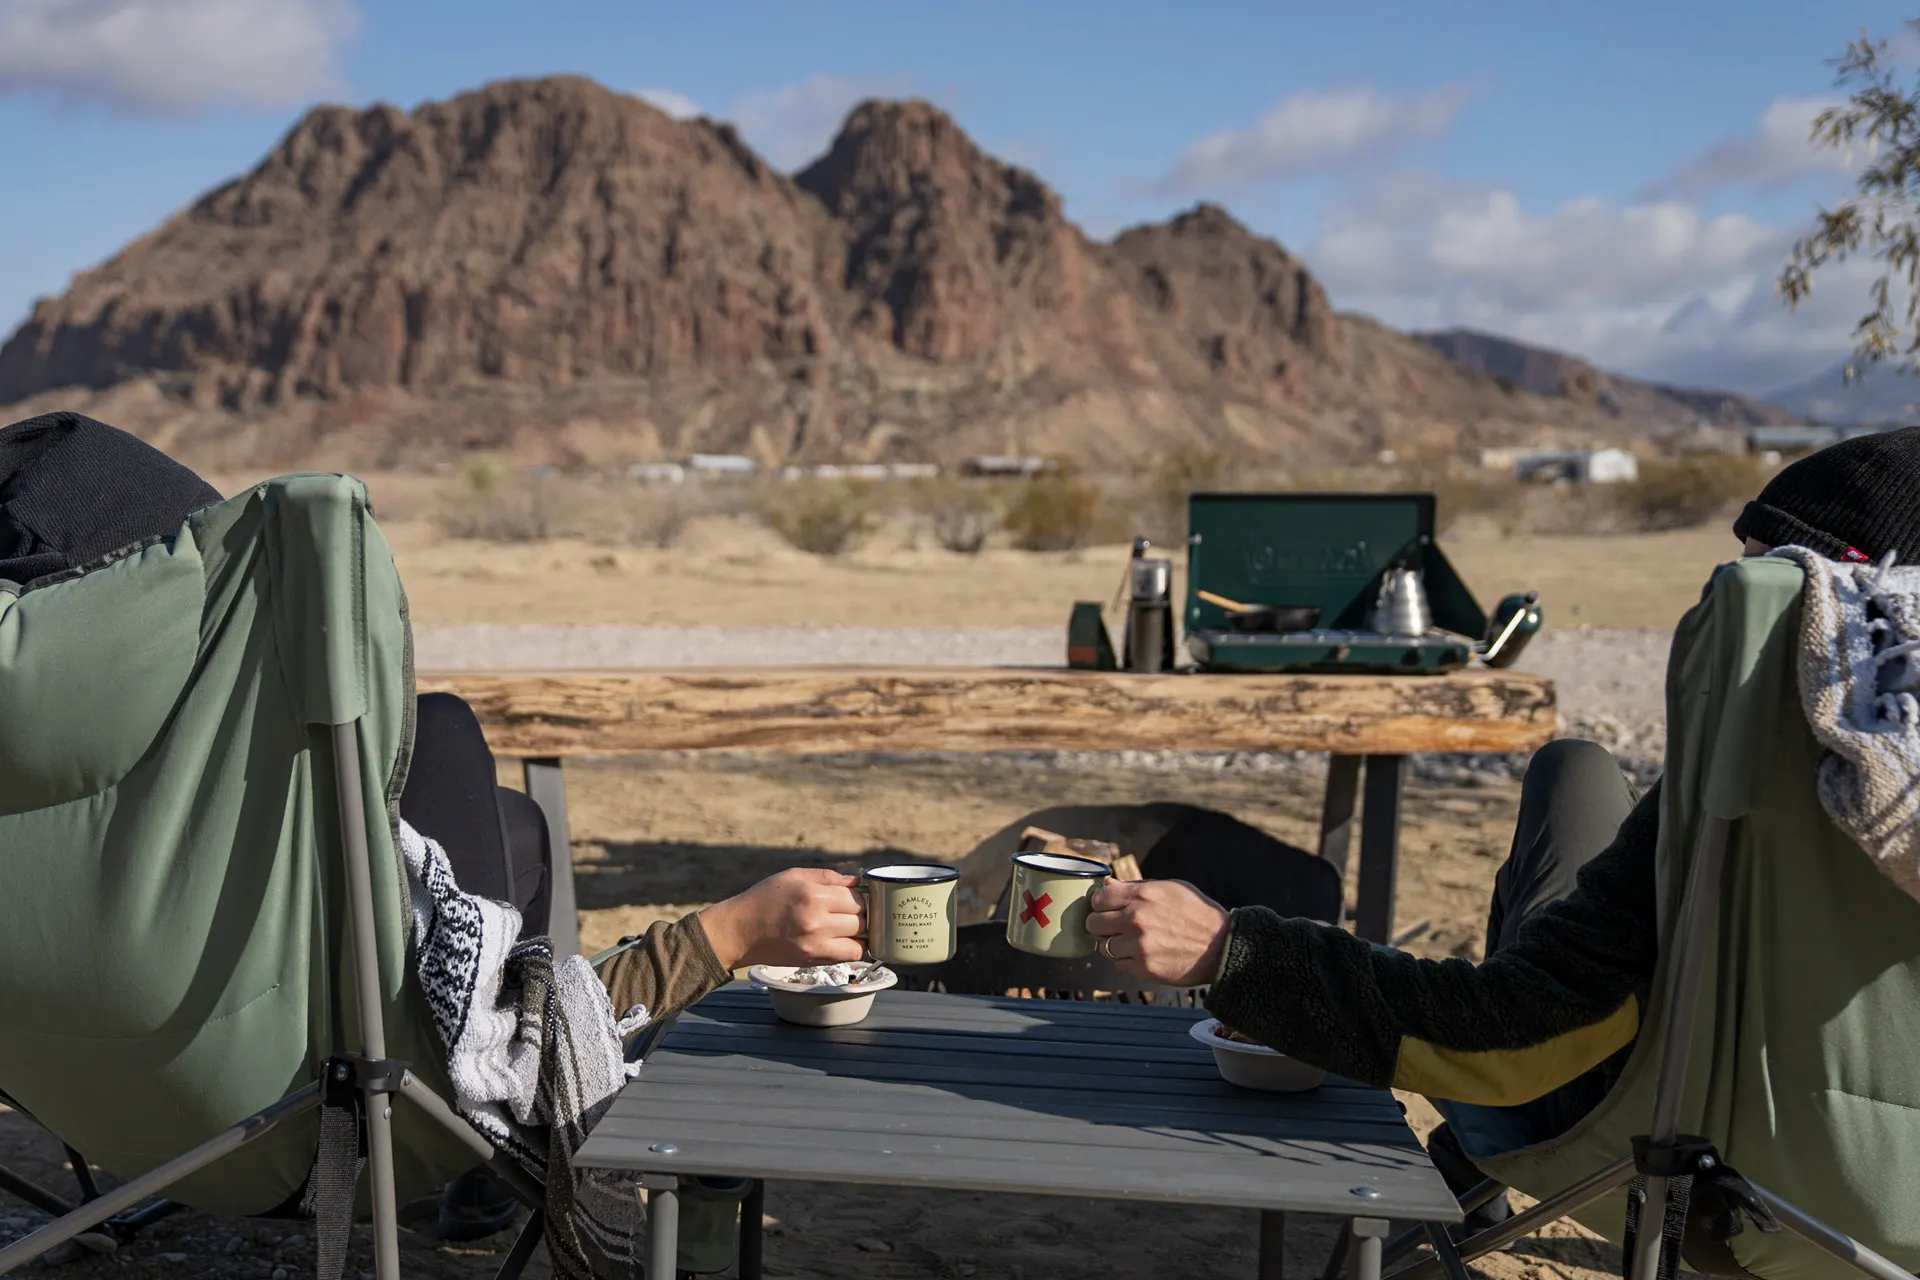 Enjoy coffee white watching sunrises at a campground